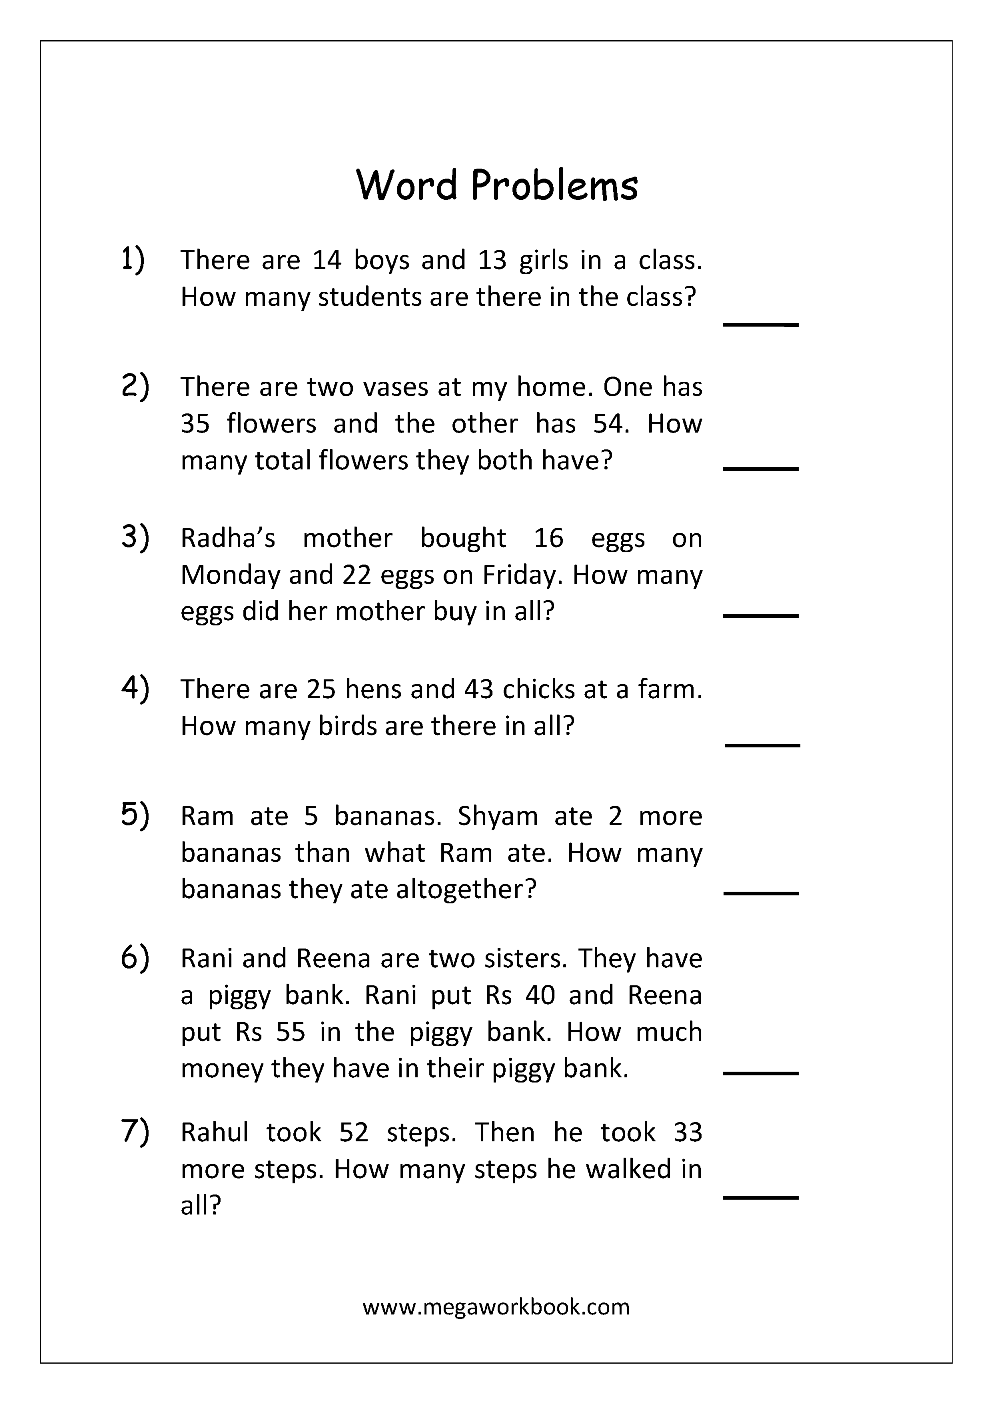 addition-and-subtraction-word-problems-grade-1-worksheets-worksheetscity